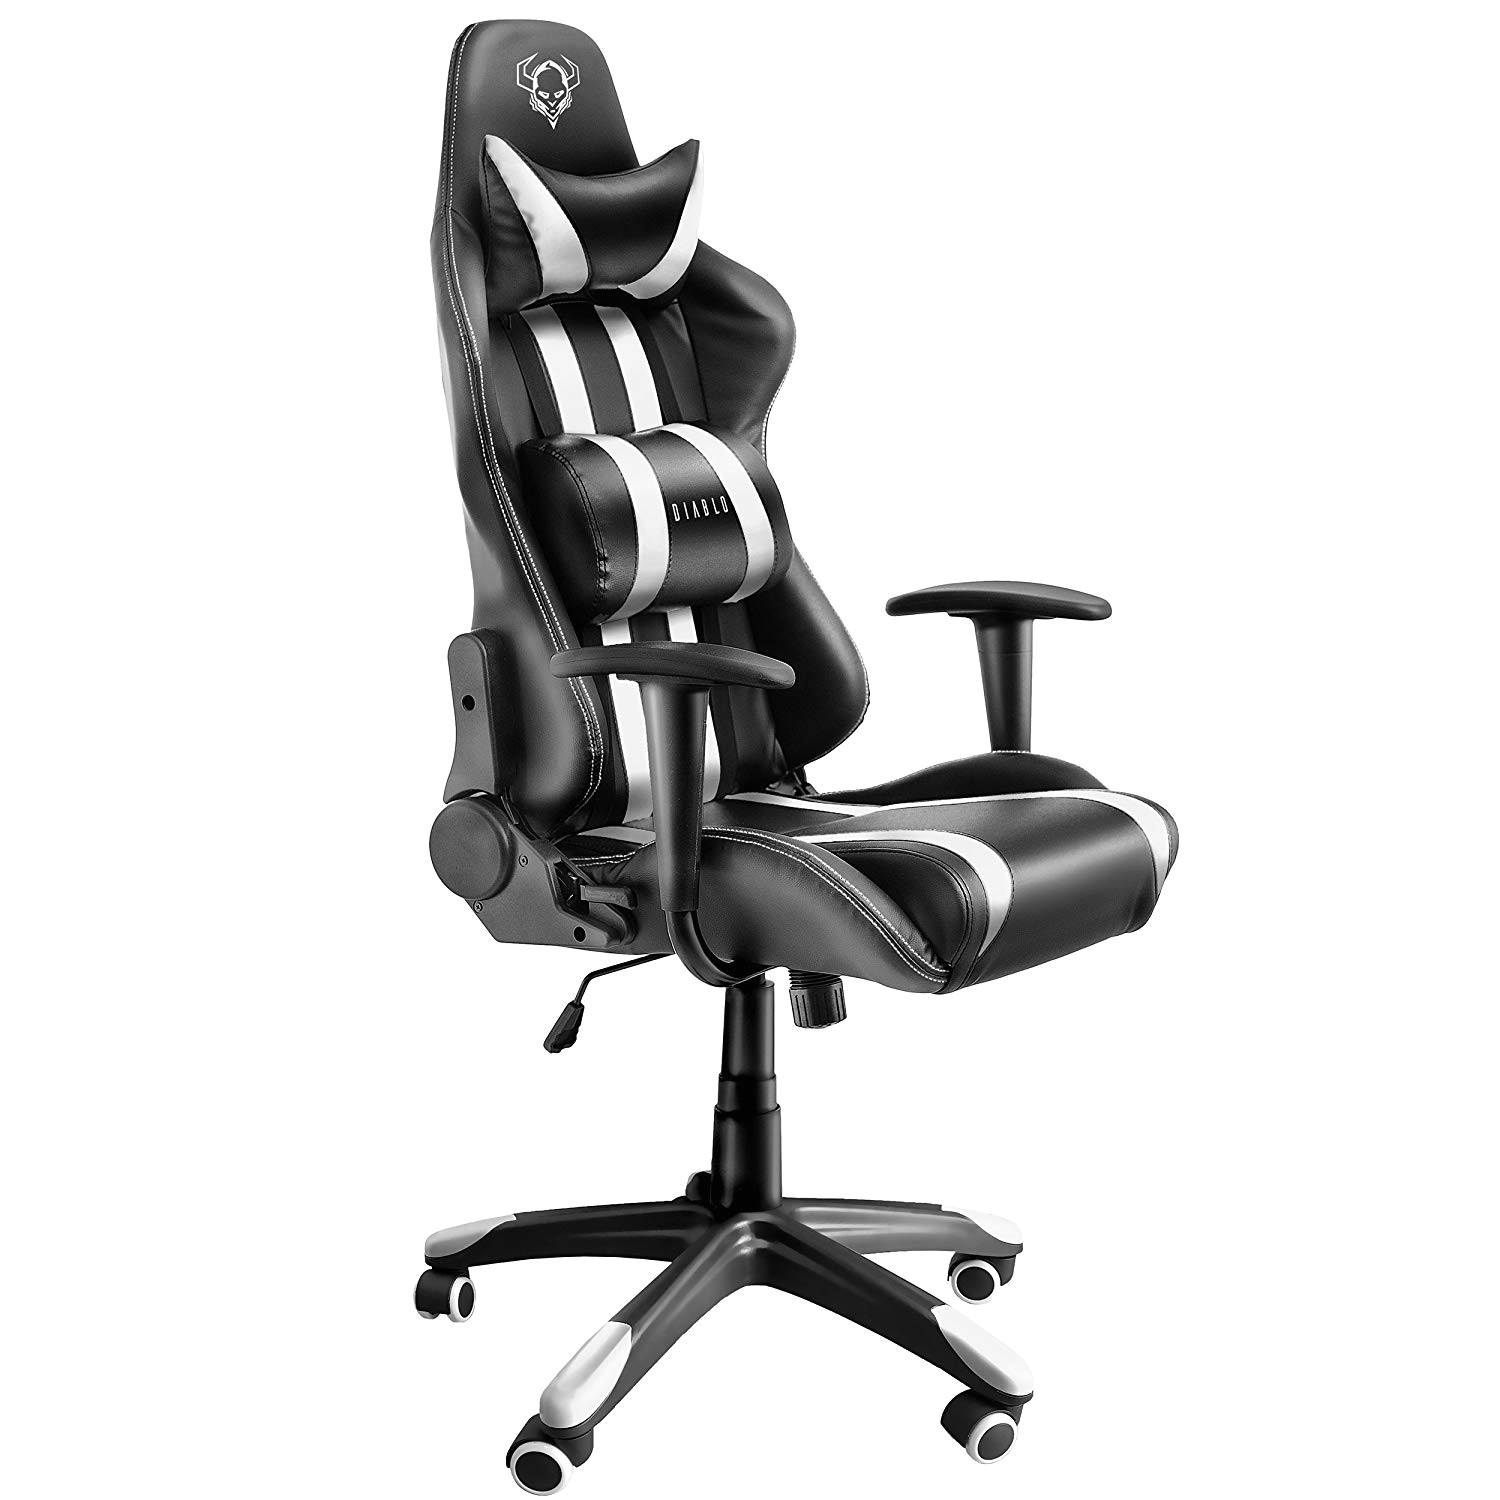 diablo x one gaming office chair lumbar cushions tilt function leatherette color selection black white 51 x 75 x 129 cm amazon co uk kitchen home